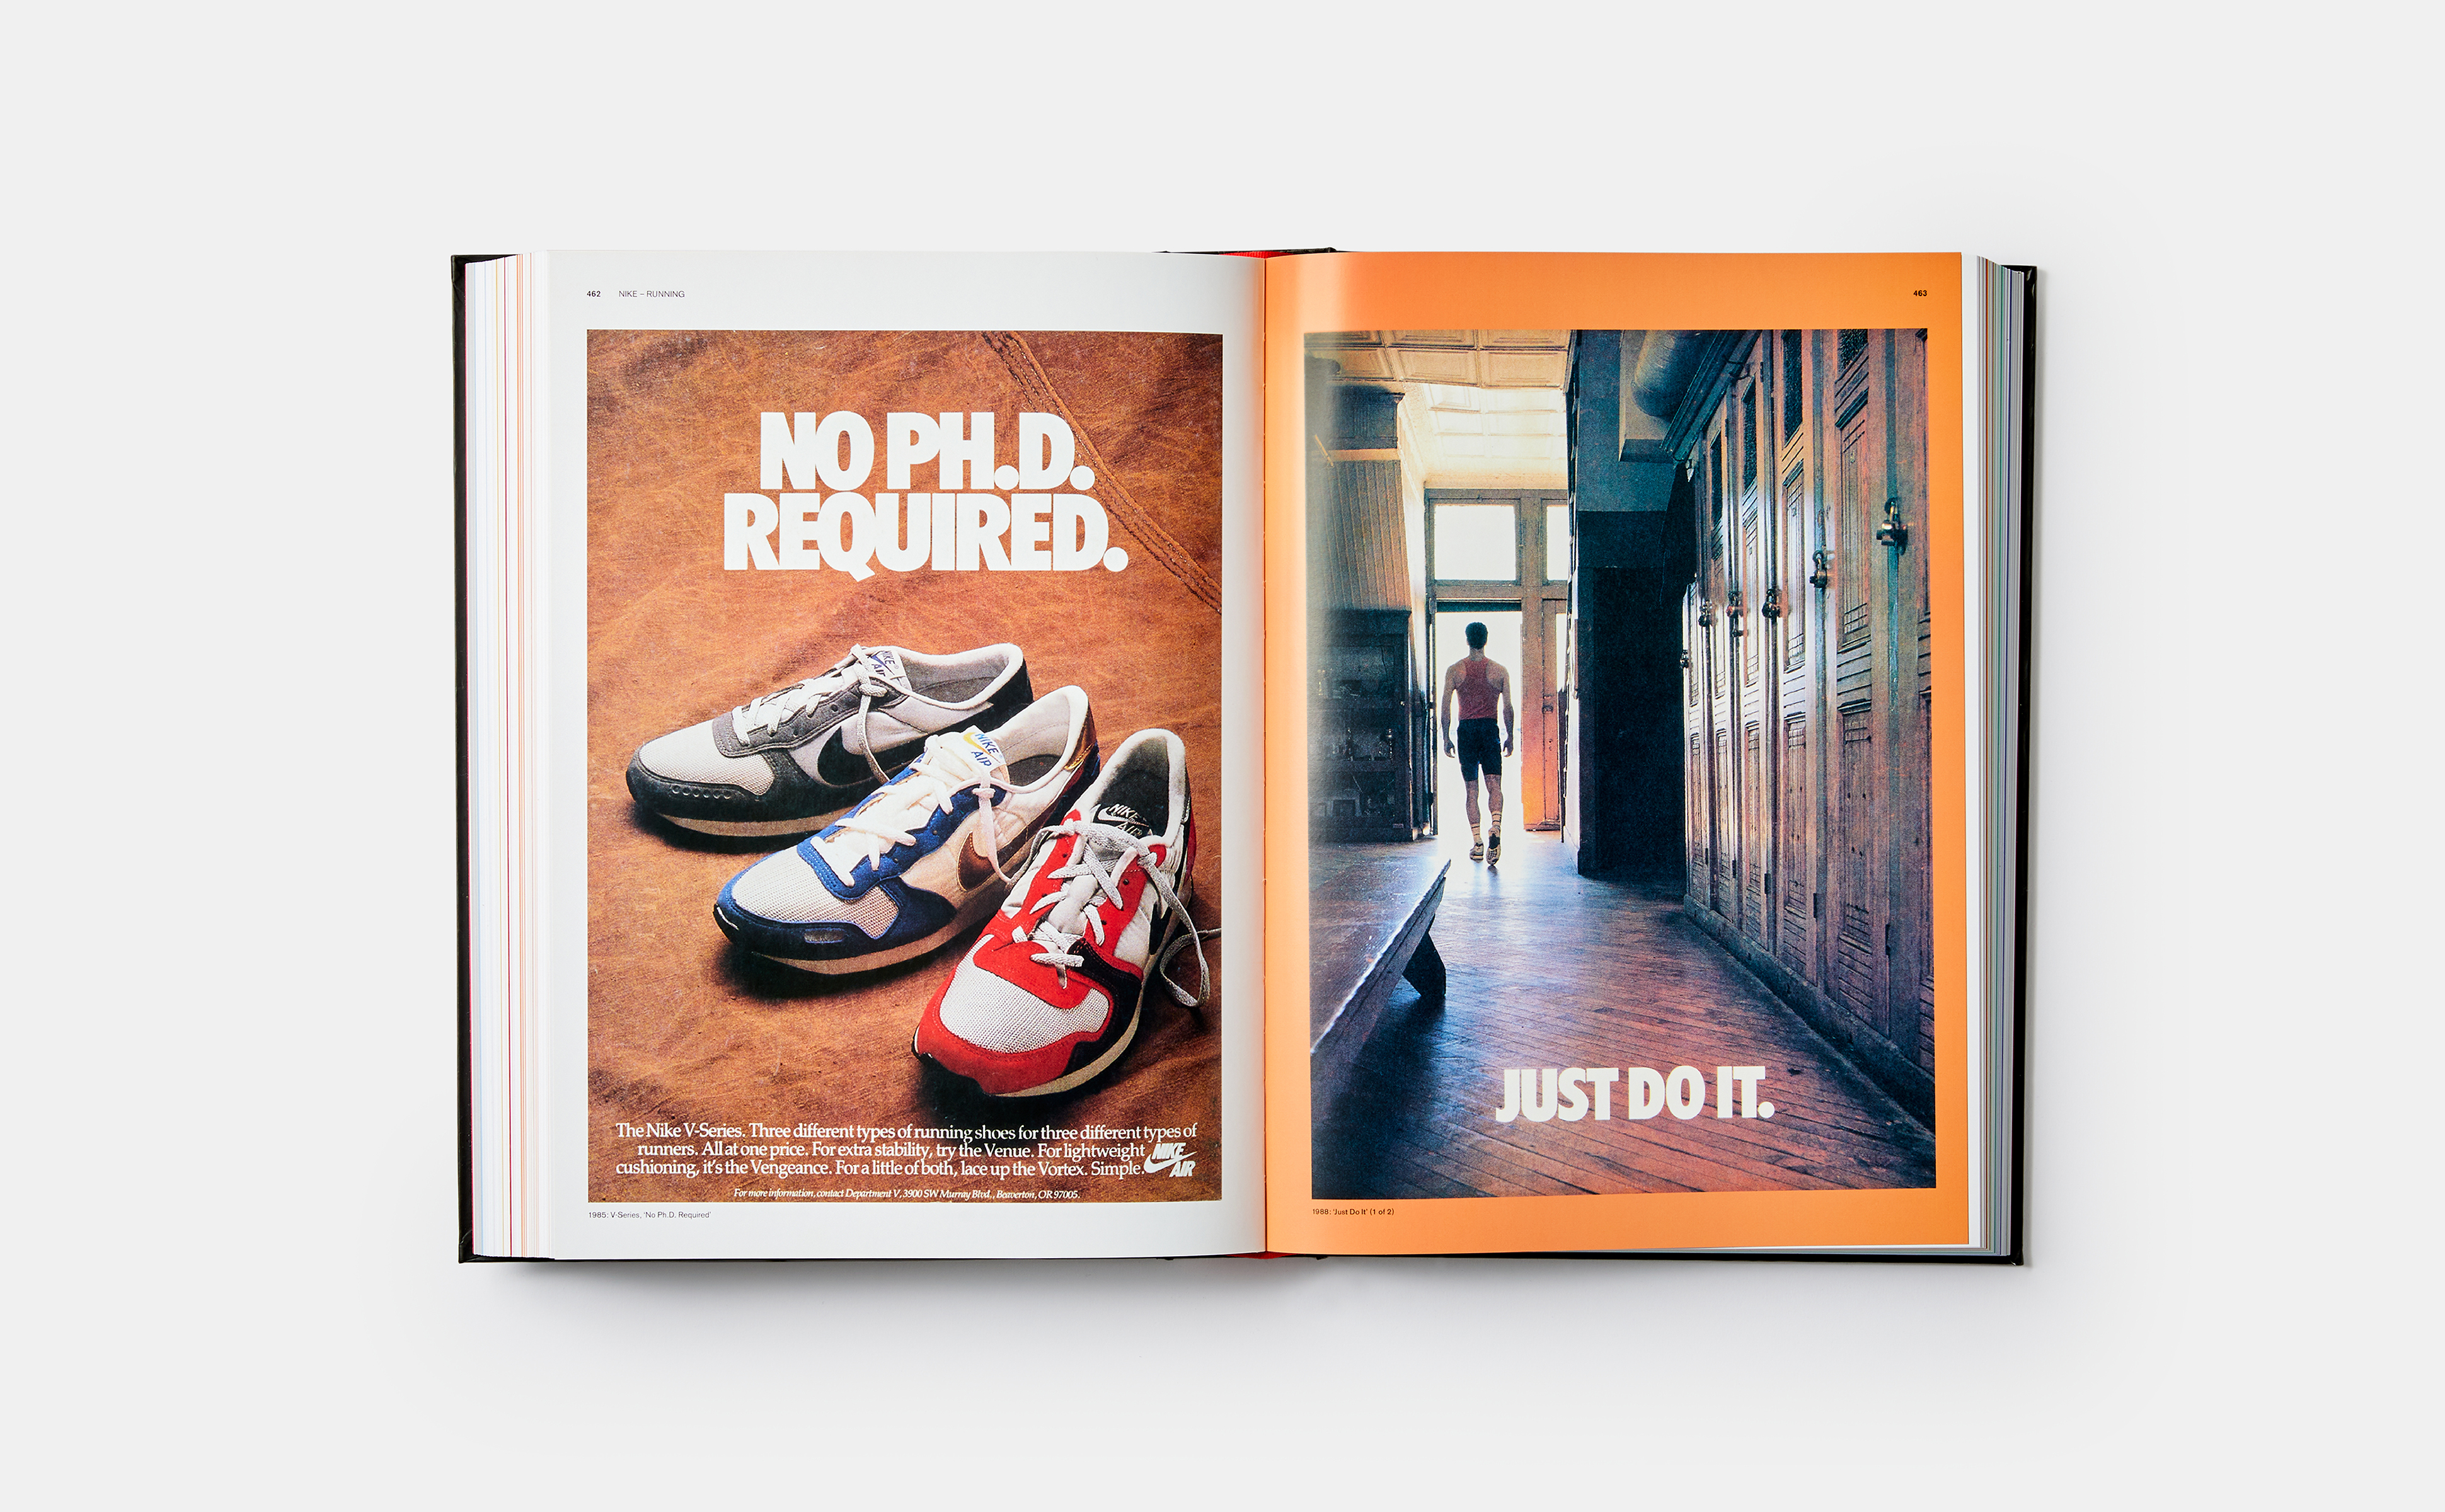 1985: V-Series, ‘No Ph.D. Required’ and 1988: ‘Just Do It’, both Nike advertisements, from Soled Out